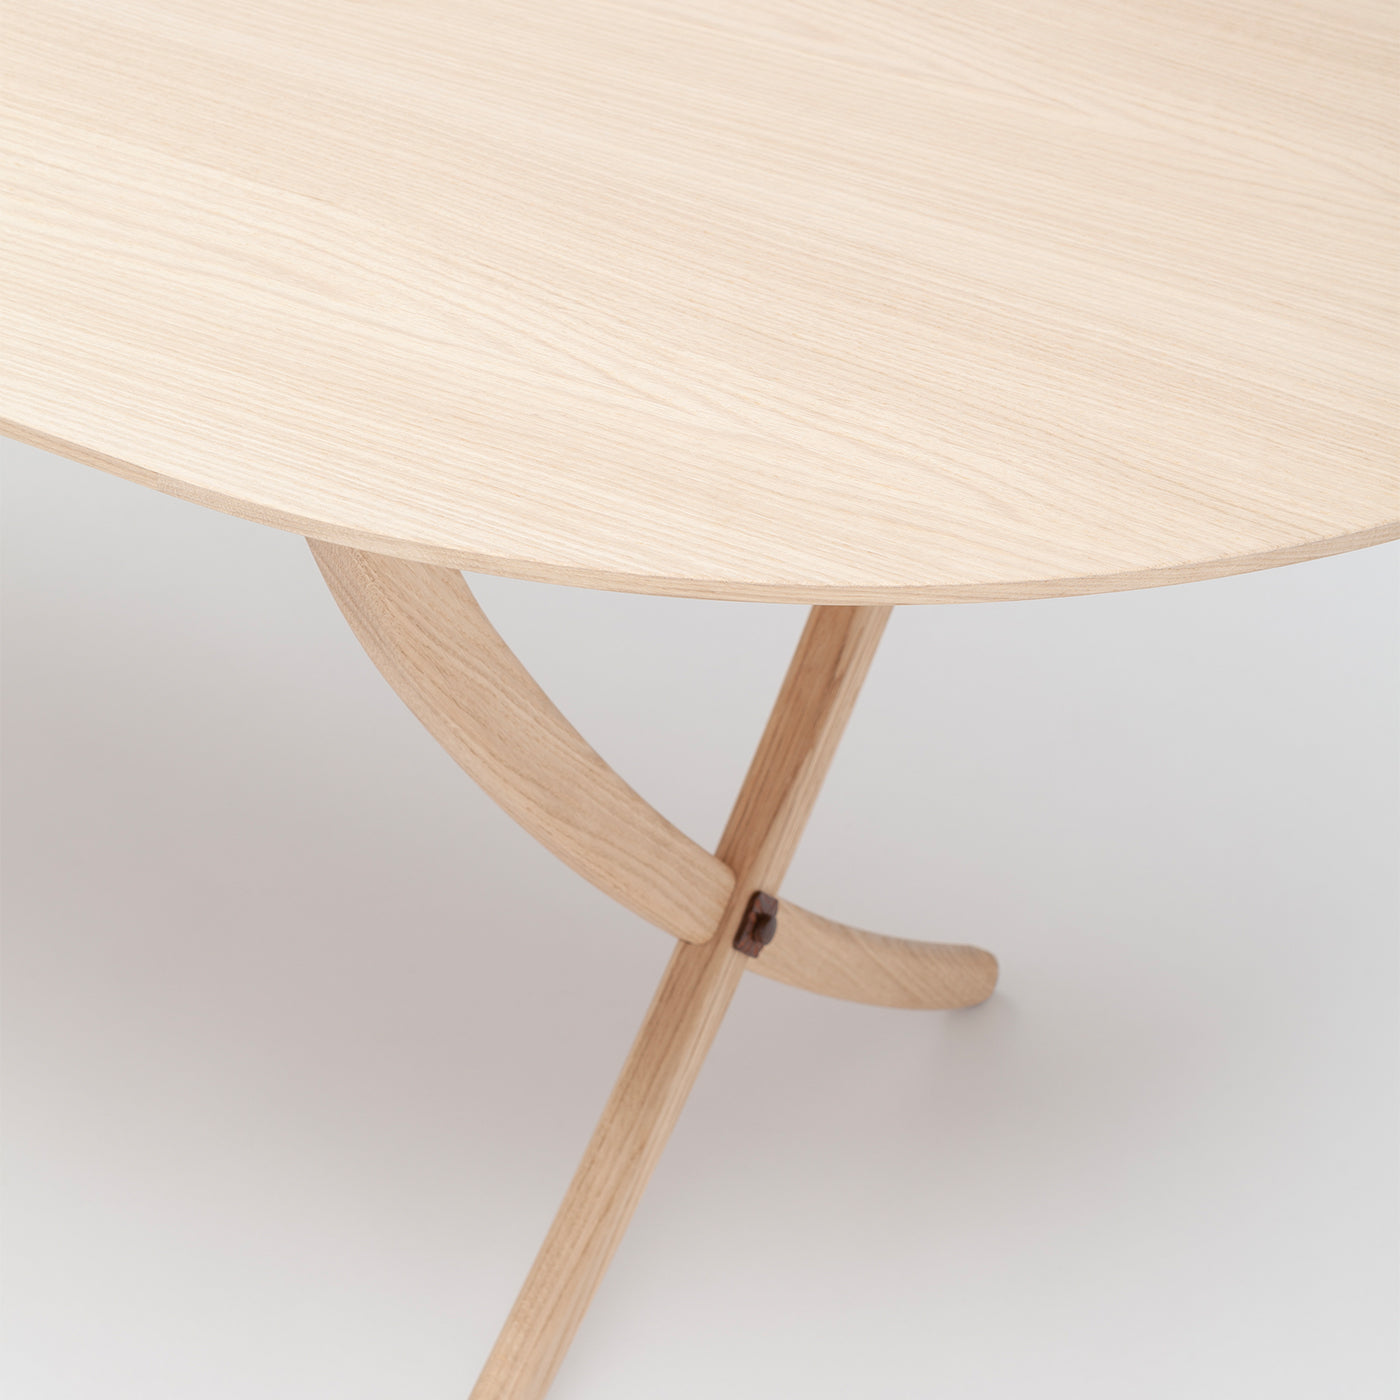 Arch Small Durmast Dining Table - Alternative view 1